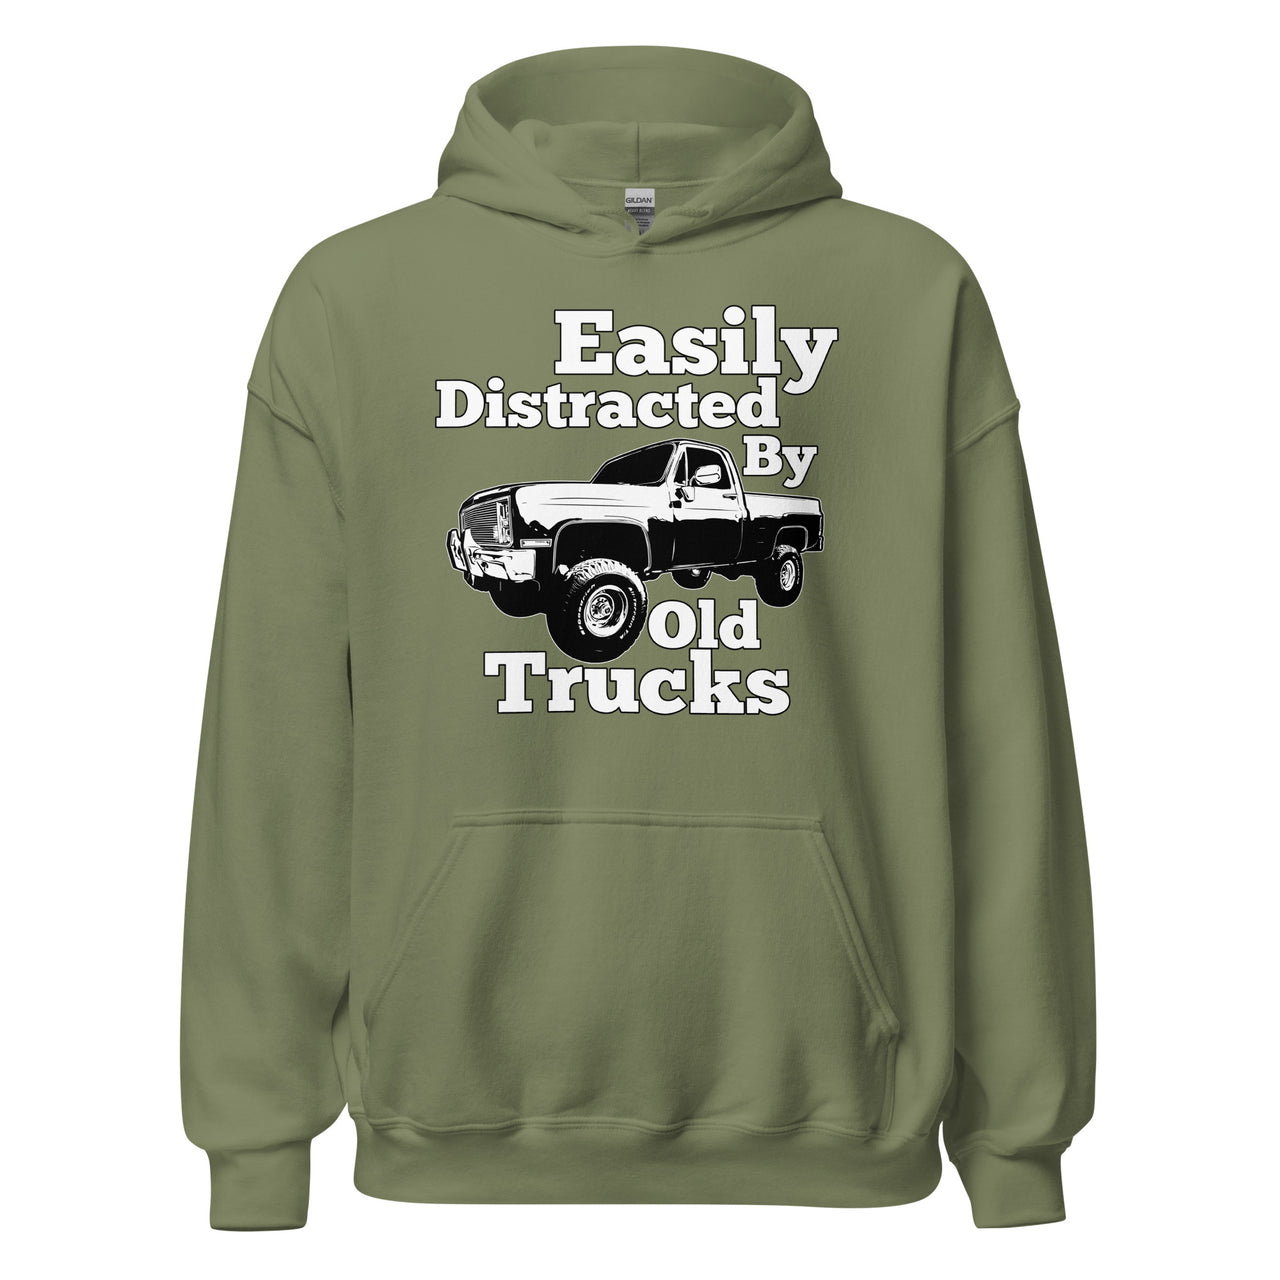 military Square Body Truck Hoodie Sweatshirt - Easily Distracted By Old Trucks